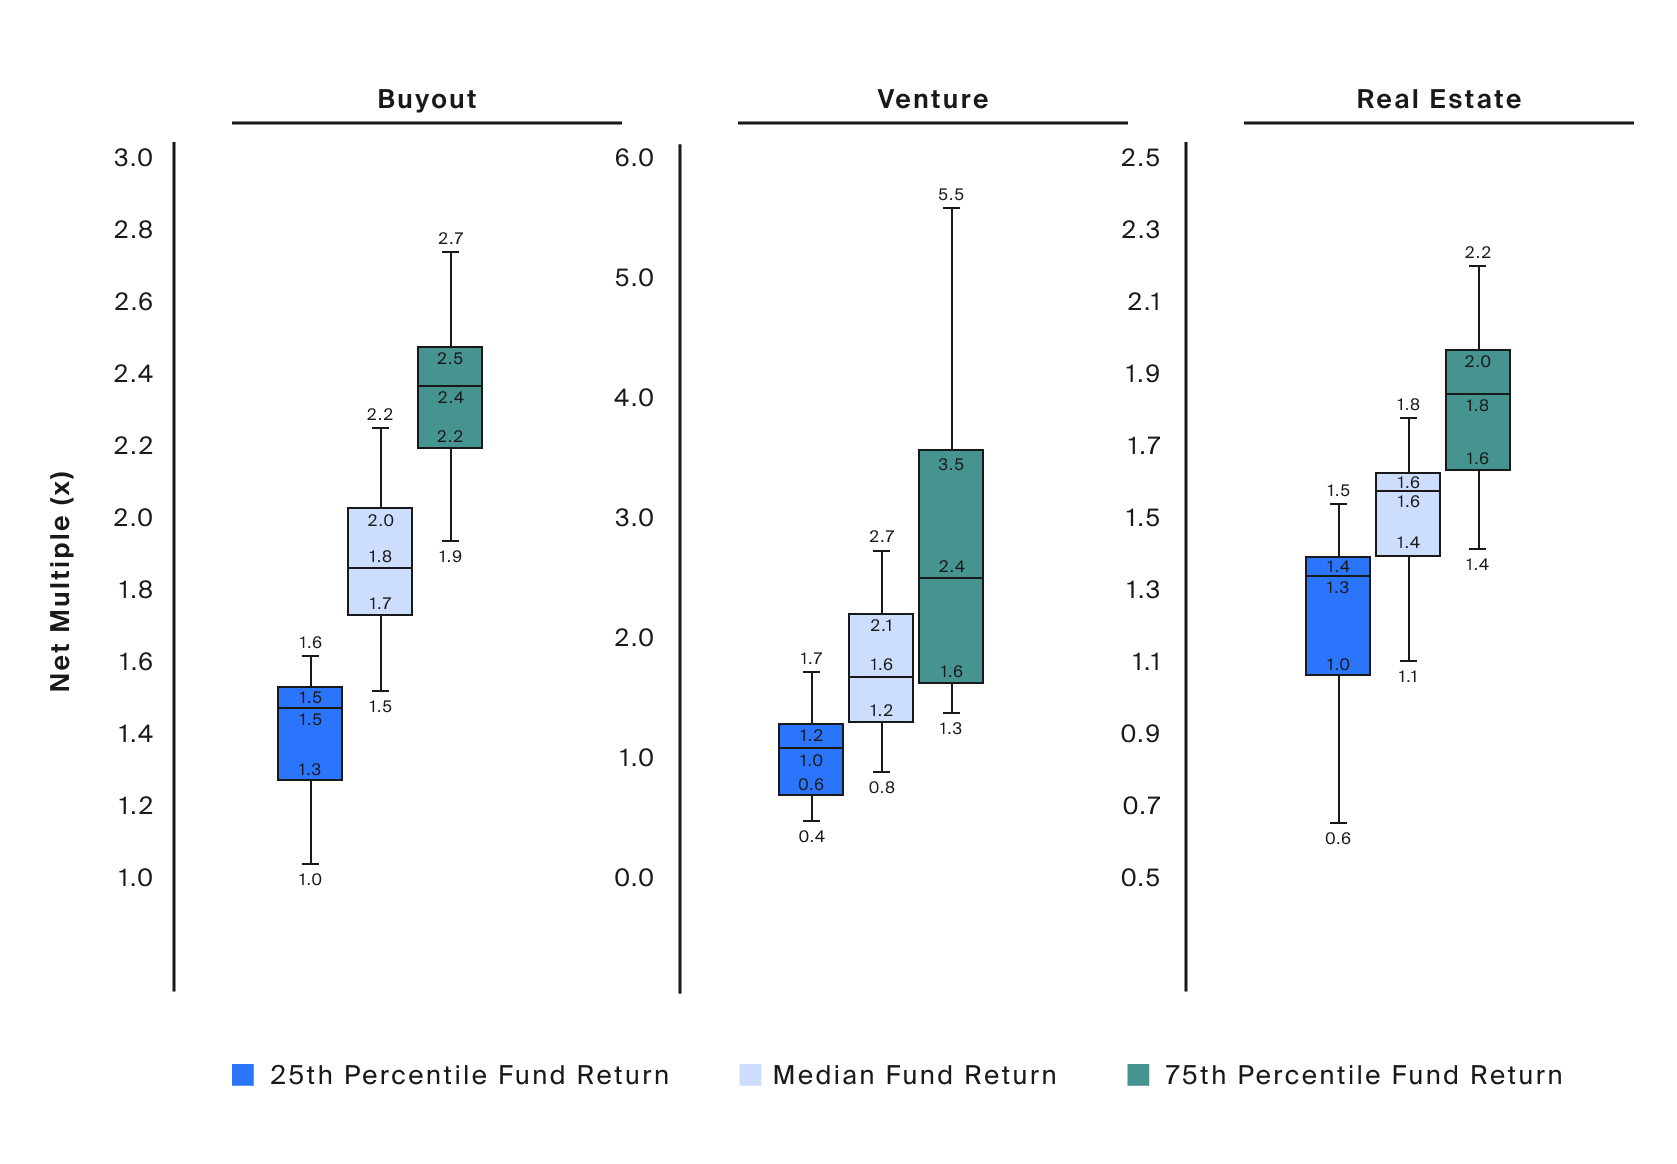 Even after controlling for peer rankings, buyout, real estate, and especially venture capital funds generated a wide range of outcomes across vintages